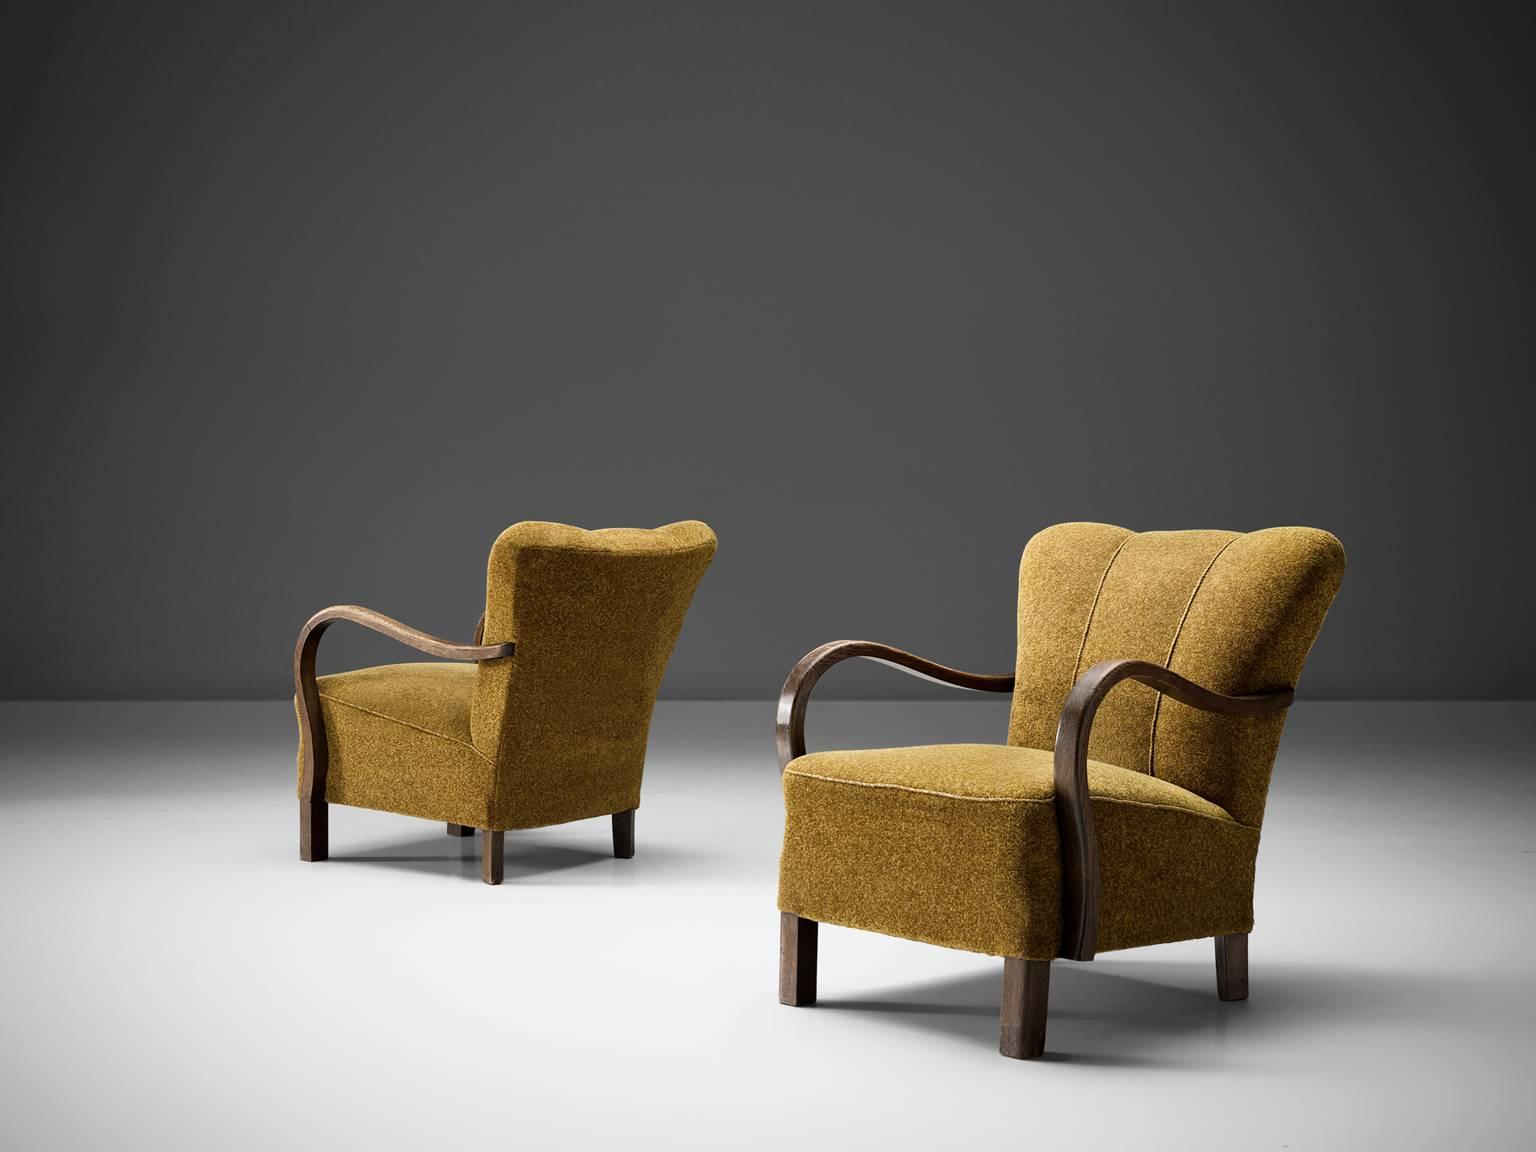 Lounge chairs, ocre yellow upholstery, beech, Denmark, 1940s 

The chairs have semi high wingbacks and feature mustard upholstery with golden vertical stripes on the top and sturdy block like wooden legs. When seen from the front the chairs